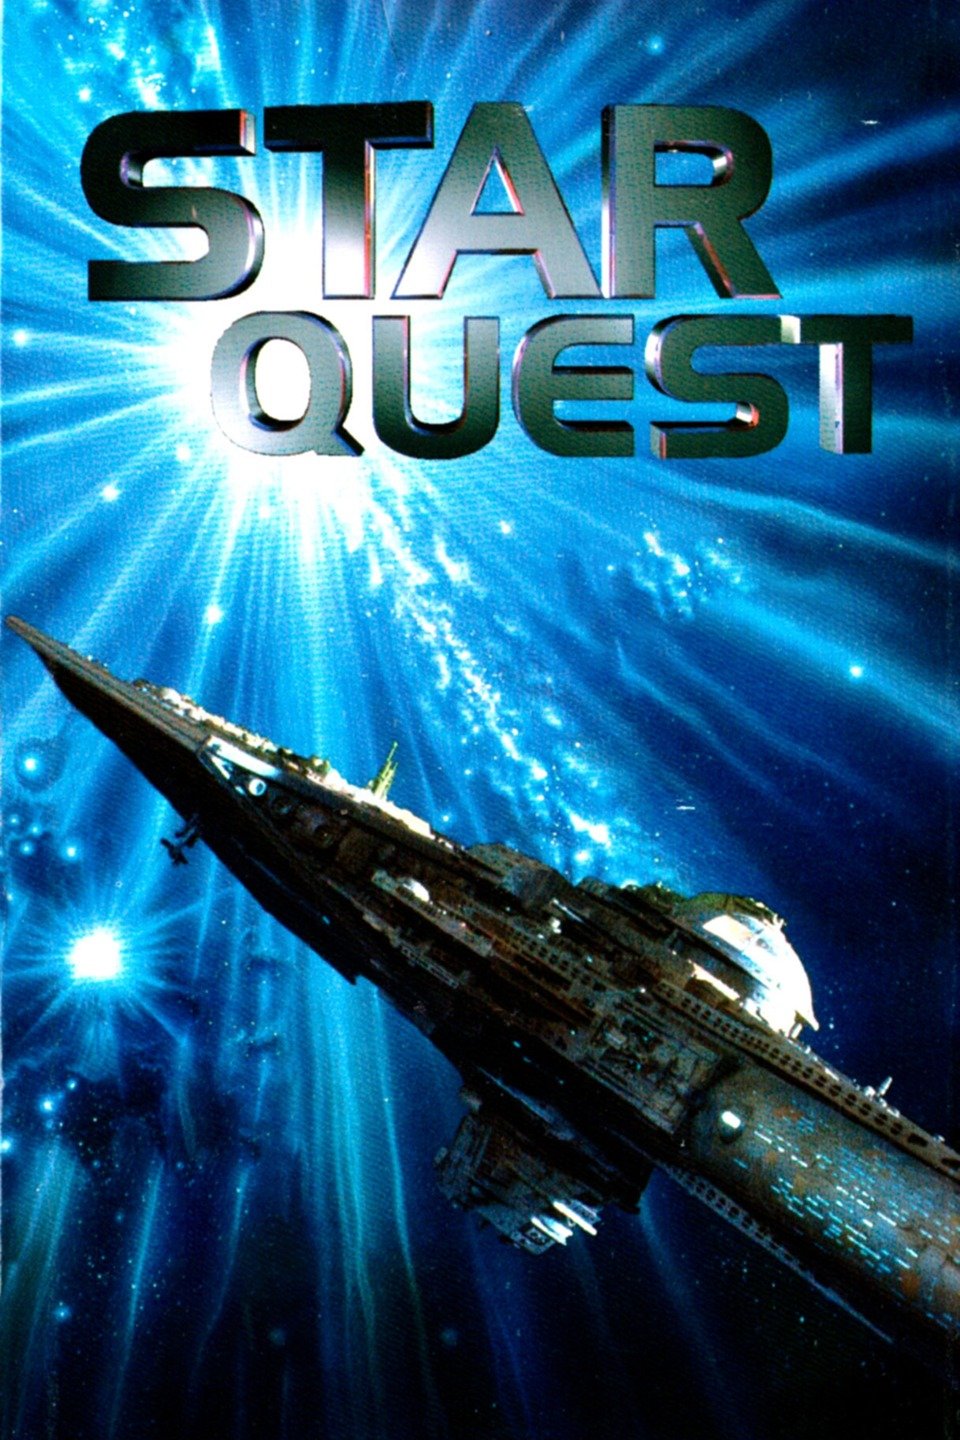 star quest movie review